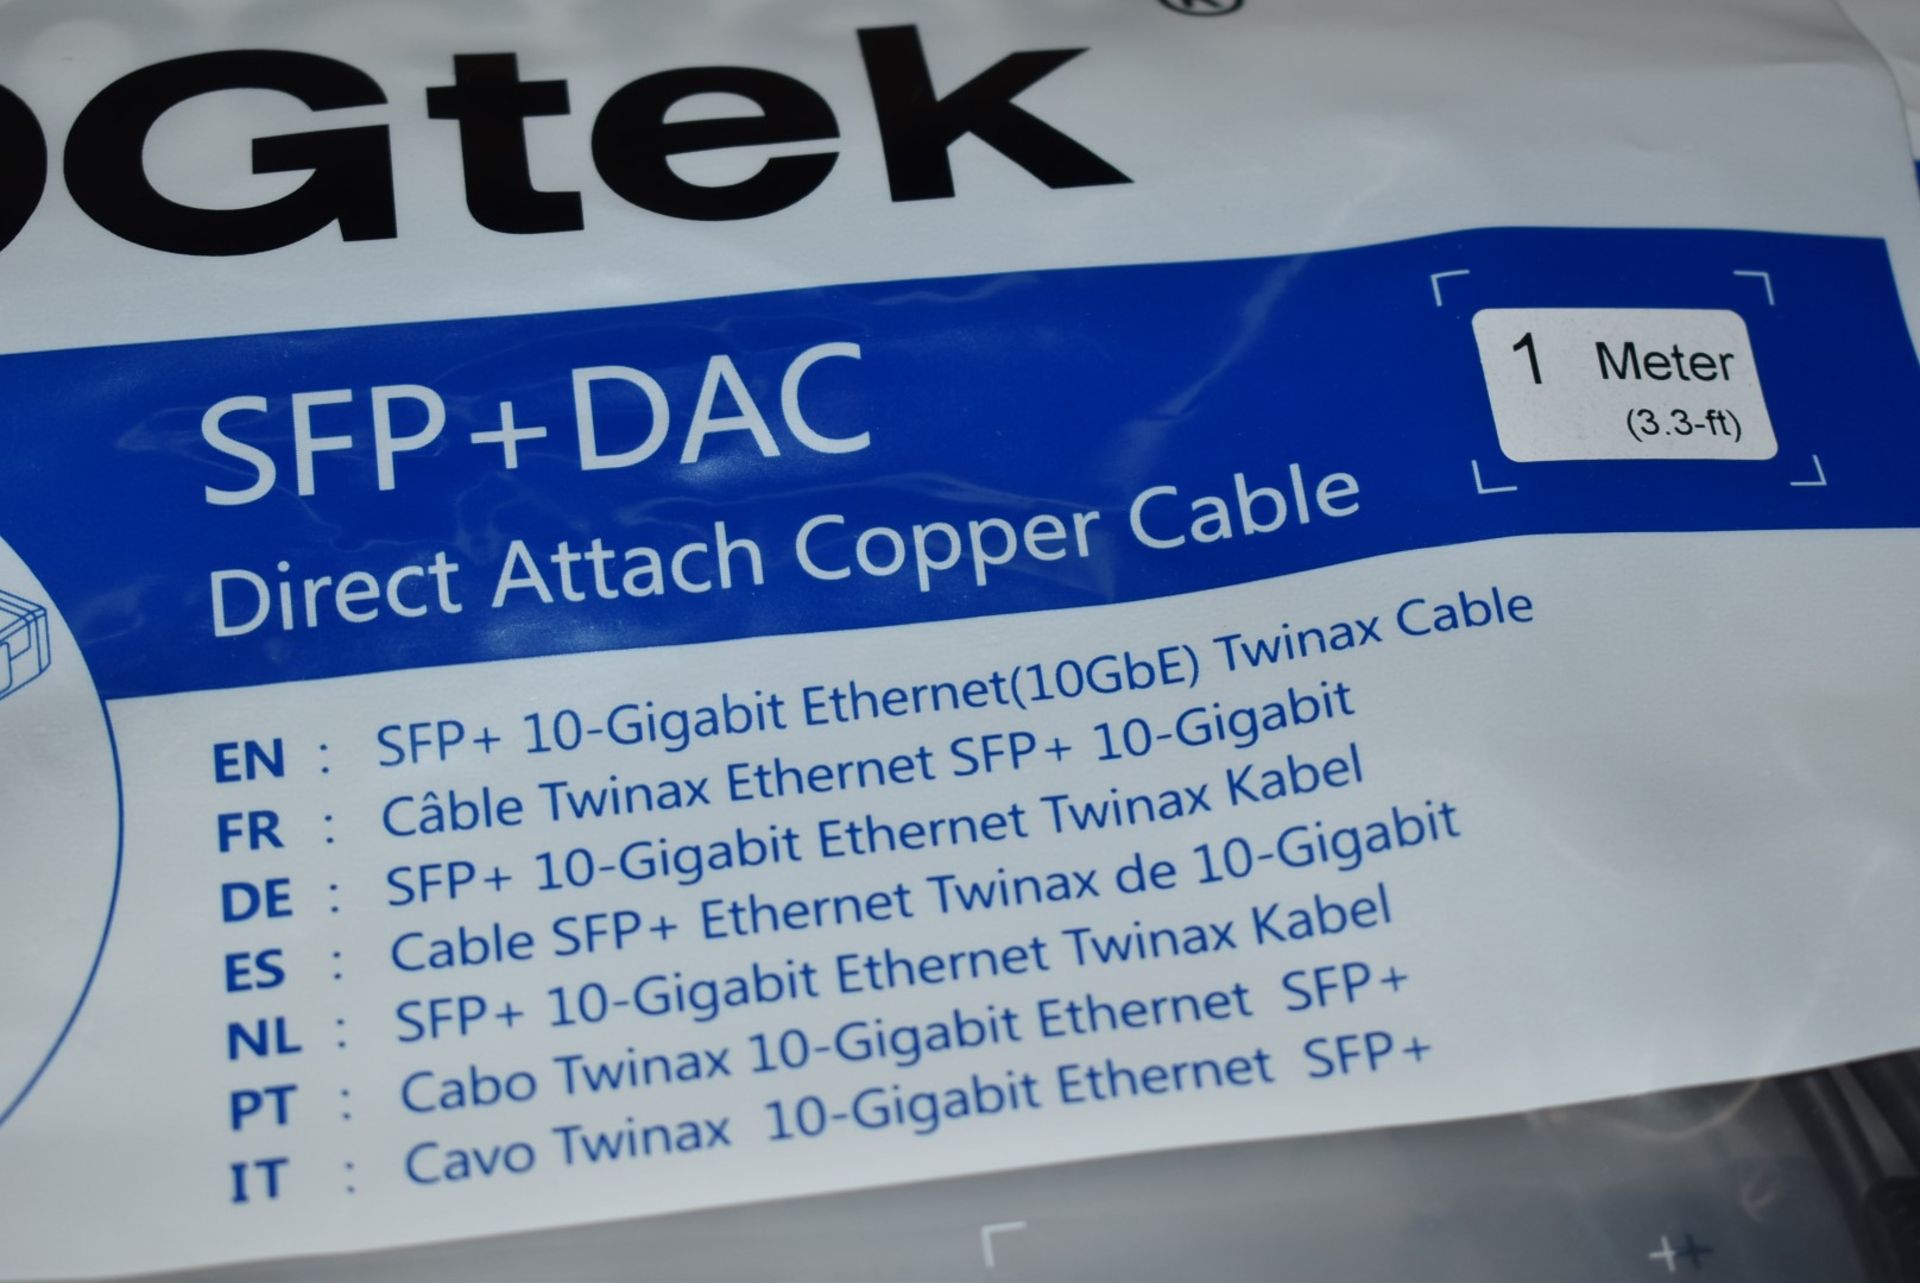 5 x 10Gtek SFP+ 10-Gigabit Ethernet Twinax Copper Cables - New and Unused - Ref: MPC191 P1 - CL678 - - Image 2 of 9